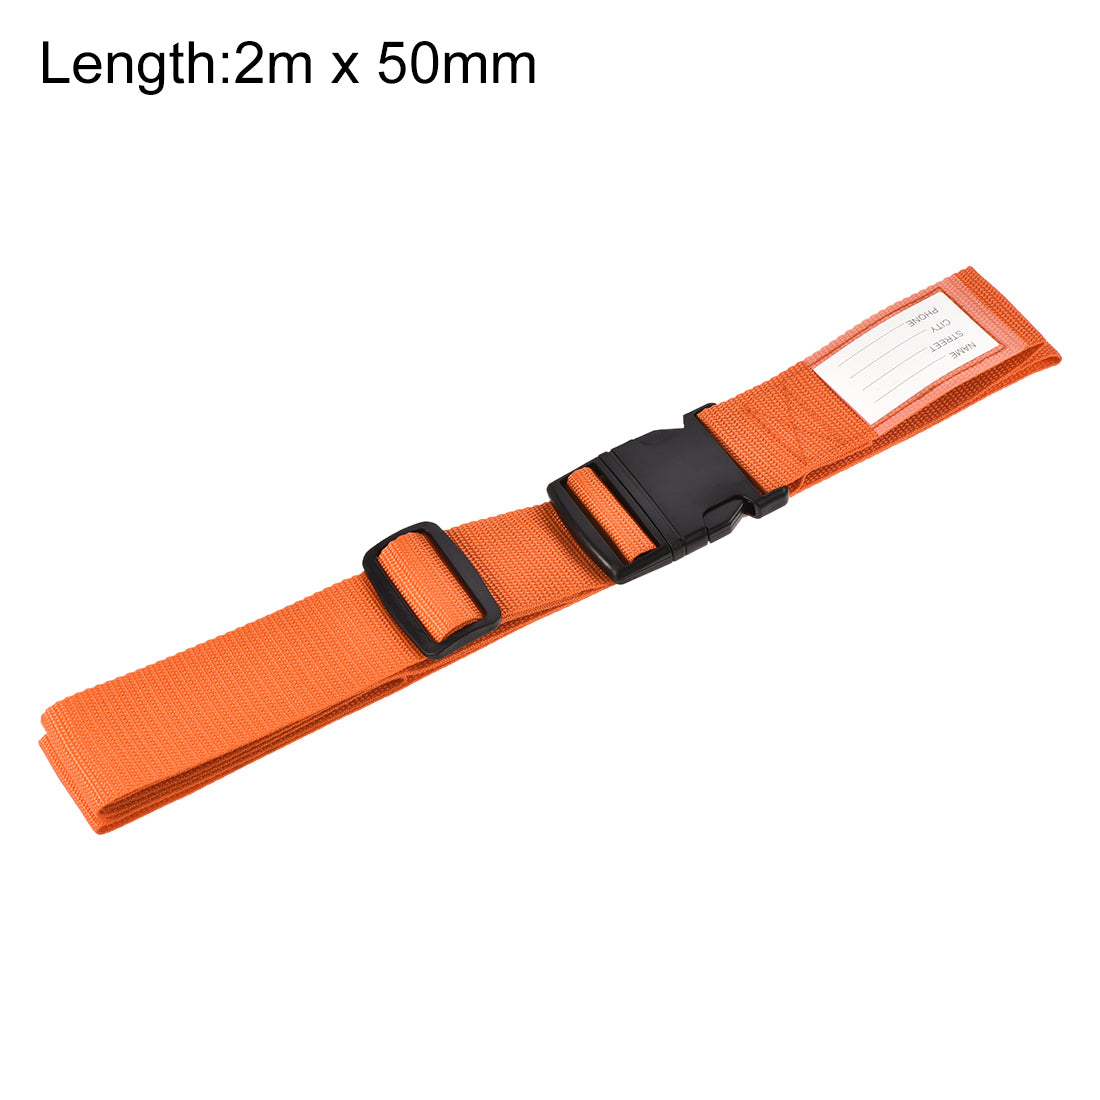 uxcell Uxcell Luggage Straps Suitcase Belts with Buckle Label, 2Mx5cm Adjustable PP Travel Bag Packing Accessories, Orange 2Pcs